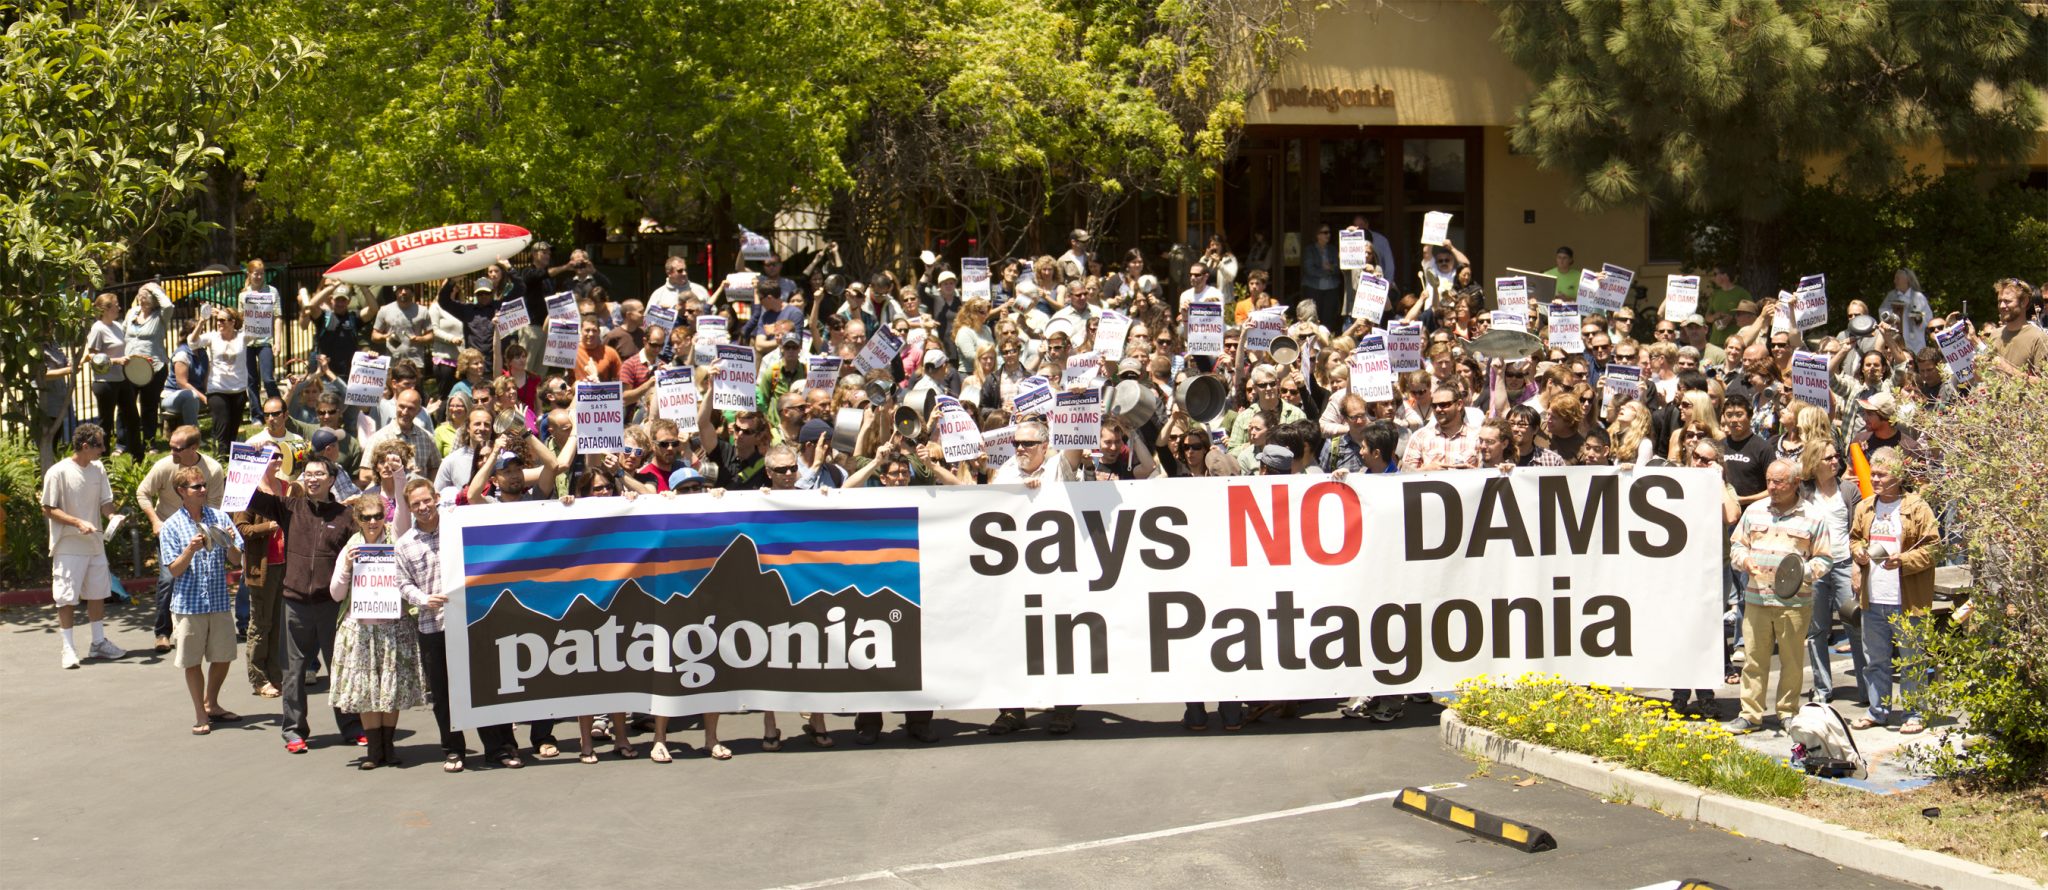 Patagonia funded the award-winning documentary film “Damnation” as part of its environmental advocacy.